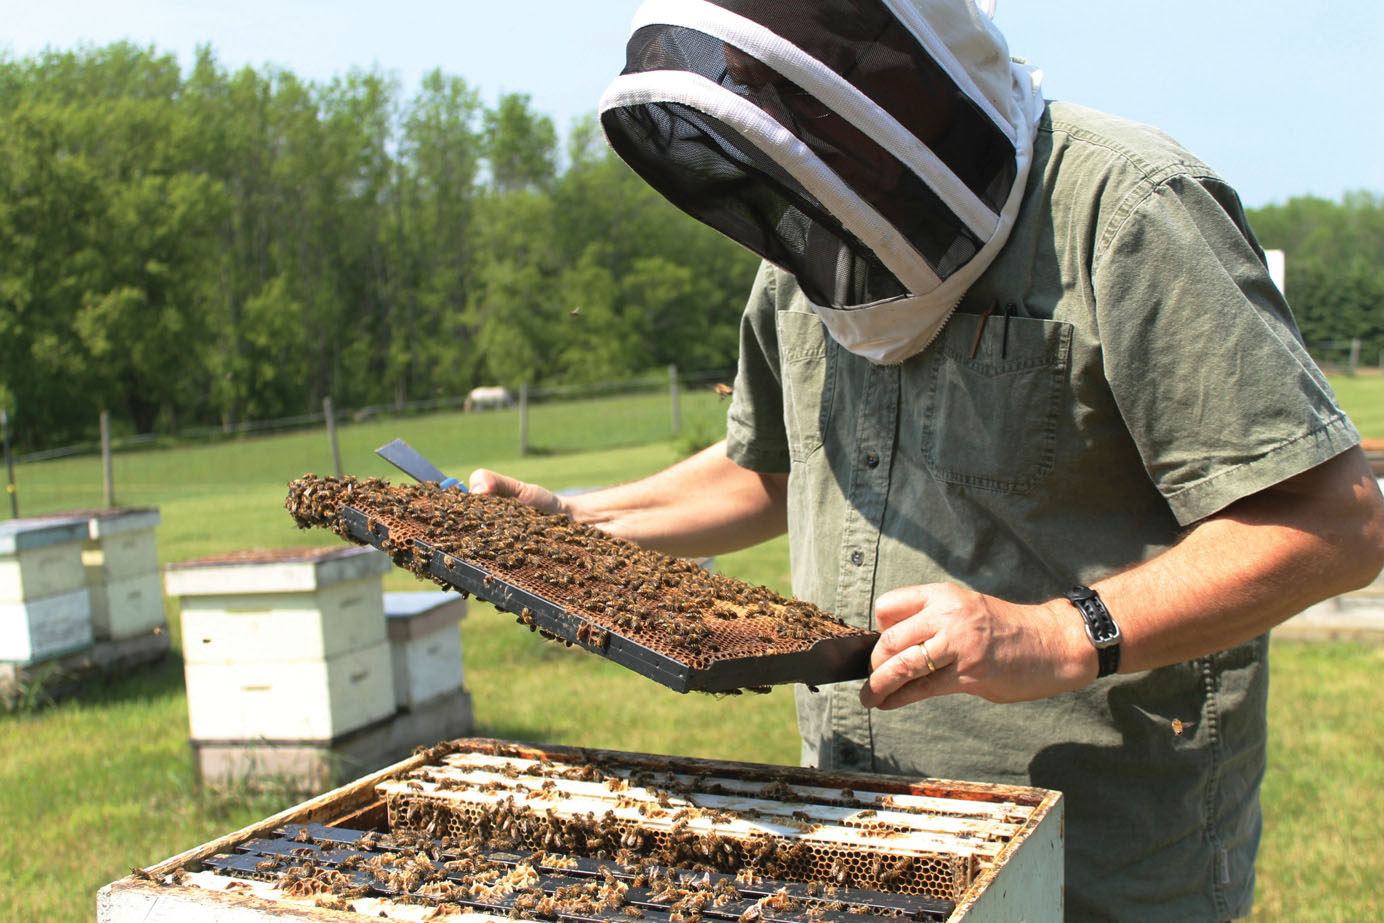 Meant to bee: The overwintering strategies of bees and how we can